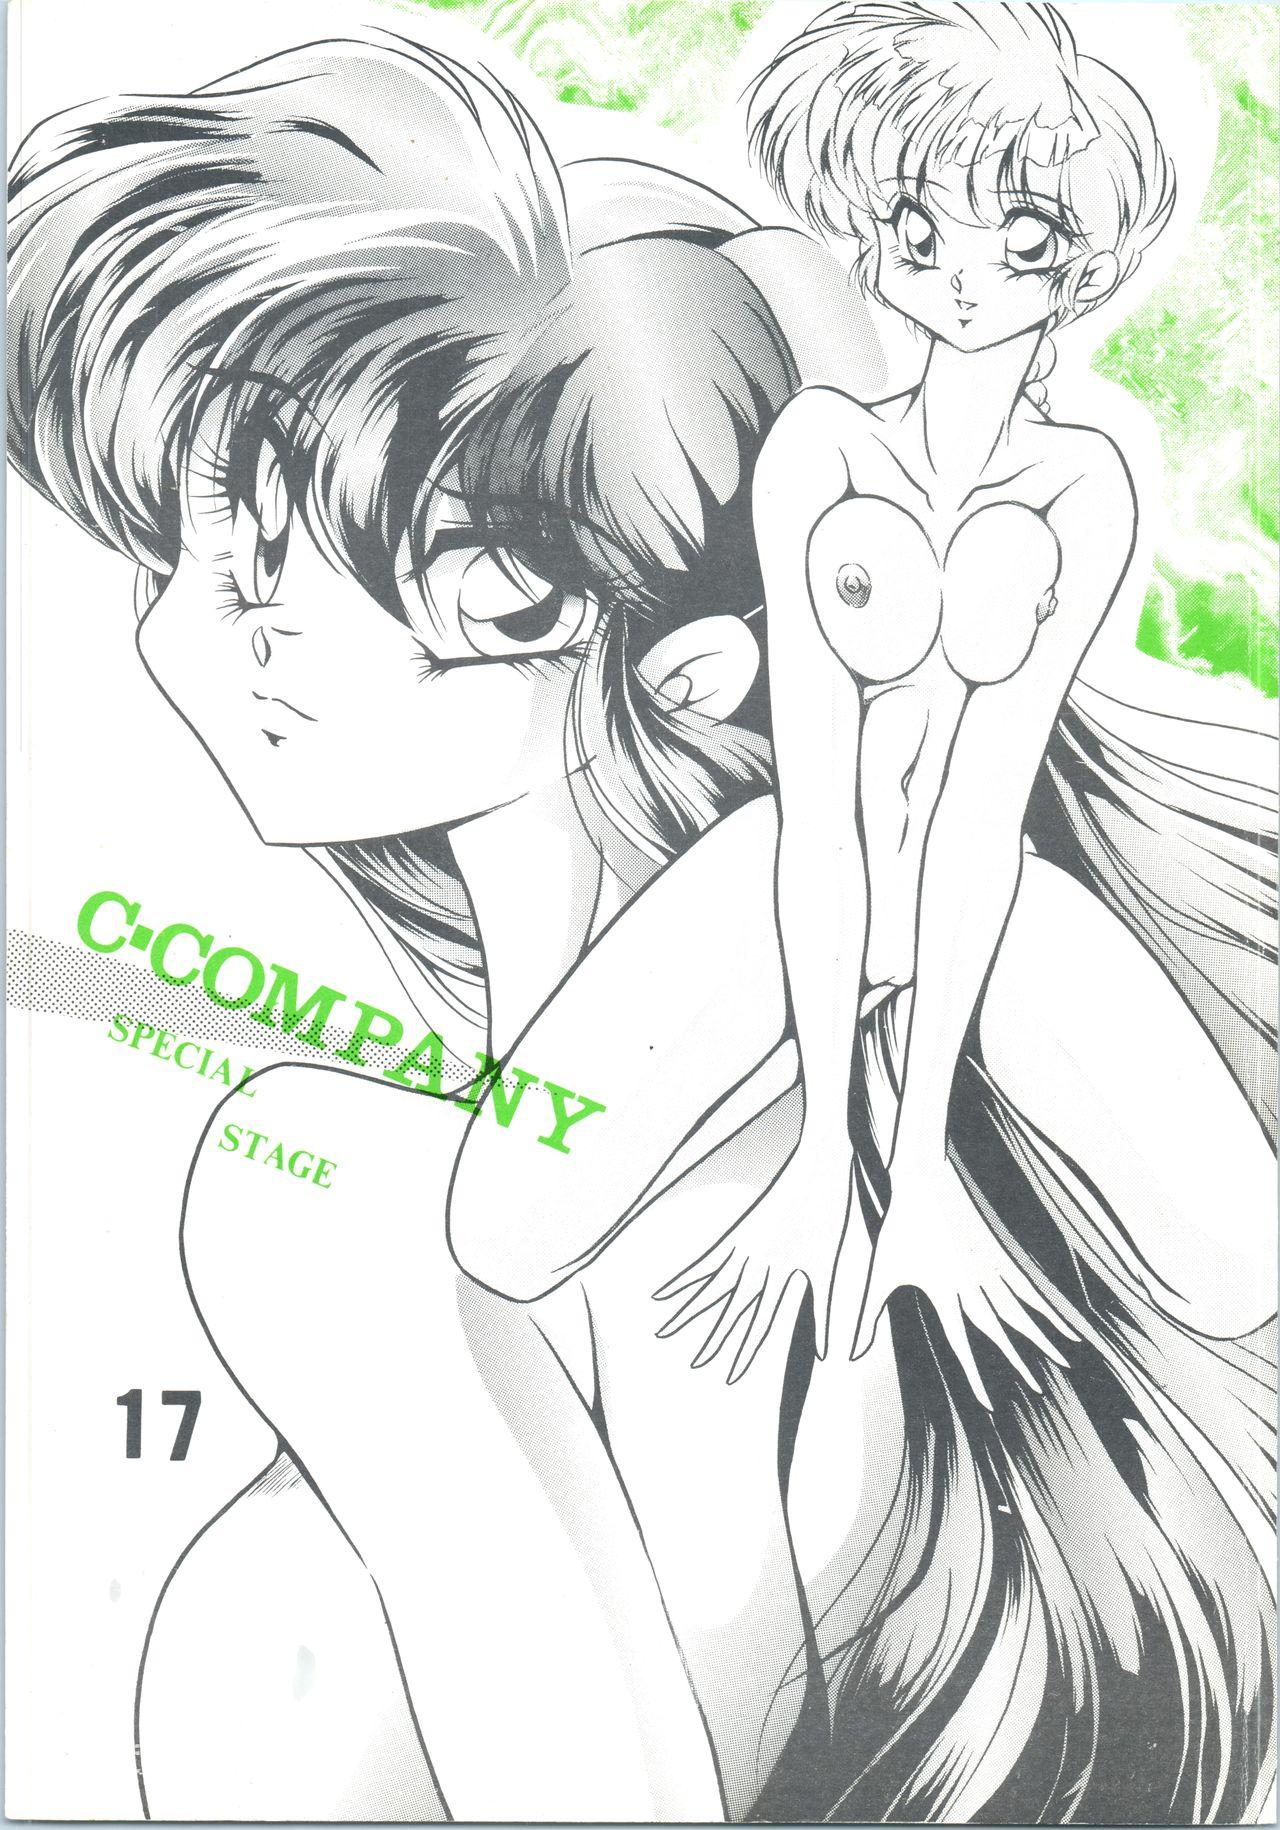 Free Amature Porn C-COMPANY SPECIAL STAGE 17 - Ranma 12 Idol project Peeing - Page 1